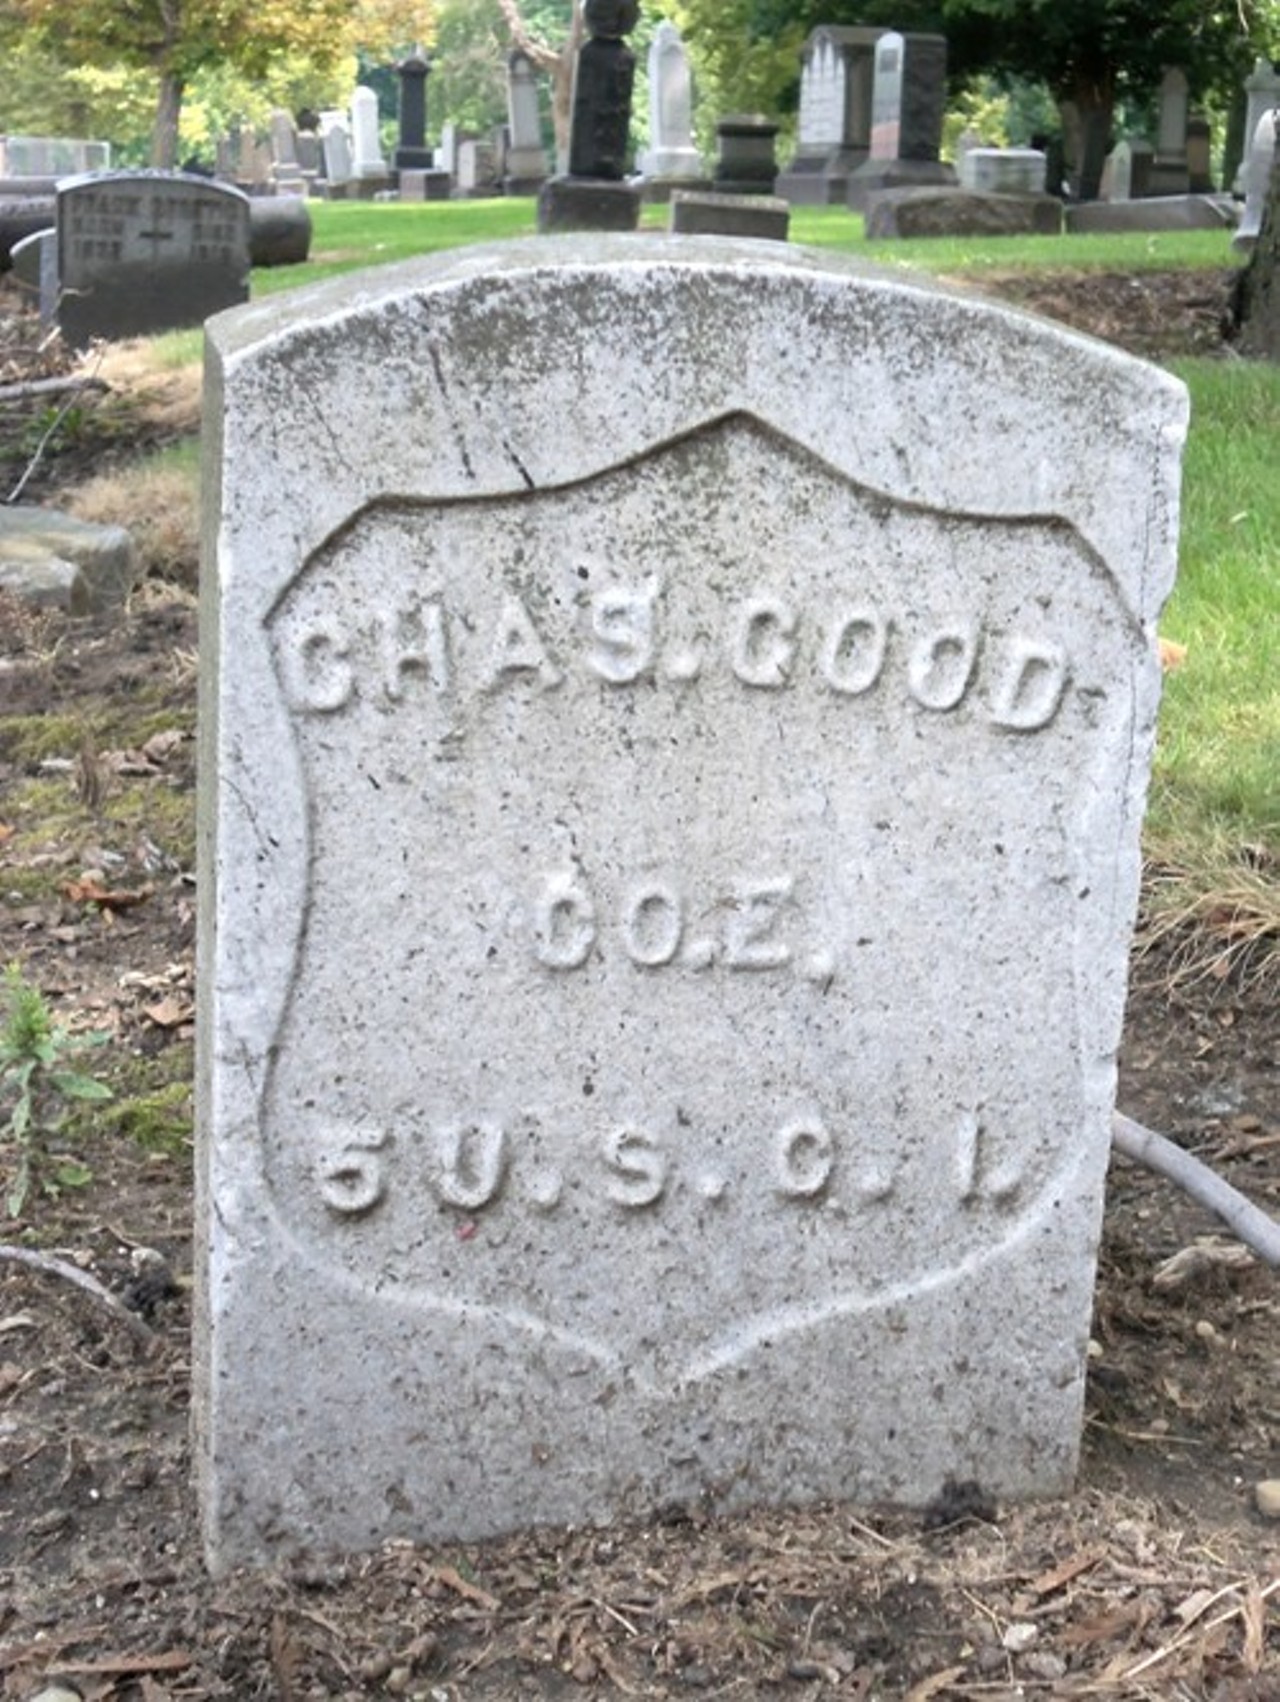 Woodland Cemetery: Black civil war vet; one of 86 buried at Woodland, though many headstones remain unmarked.